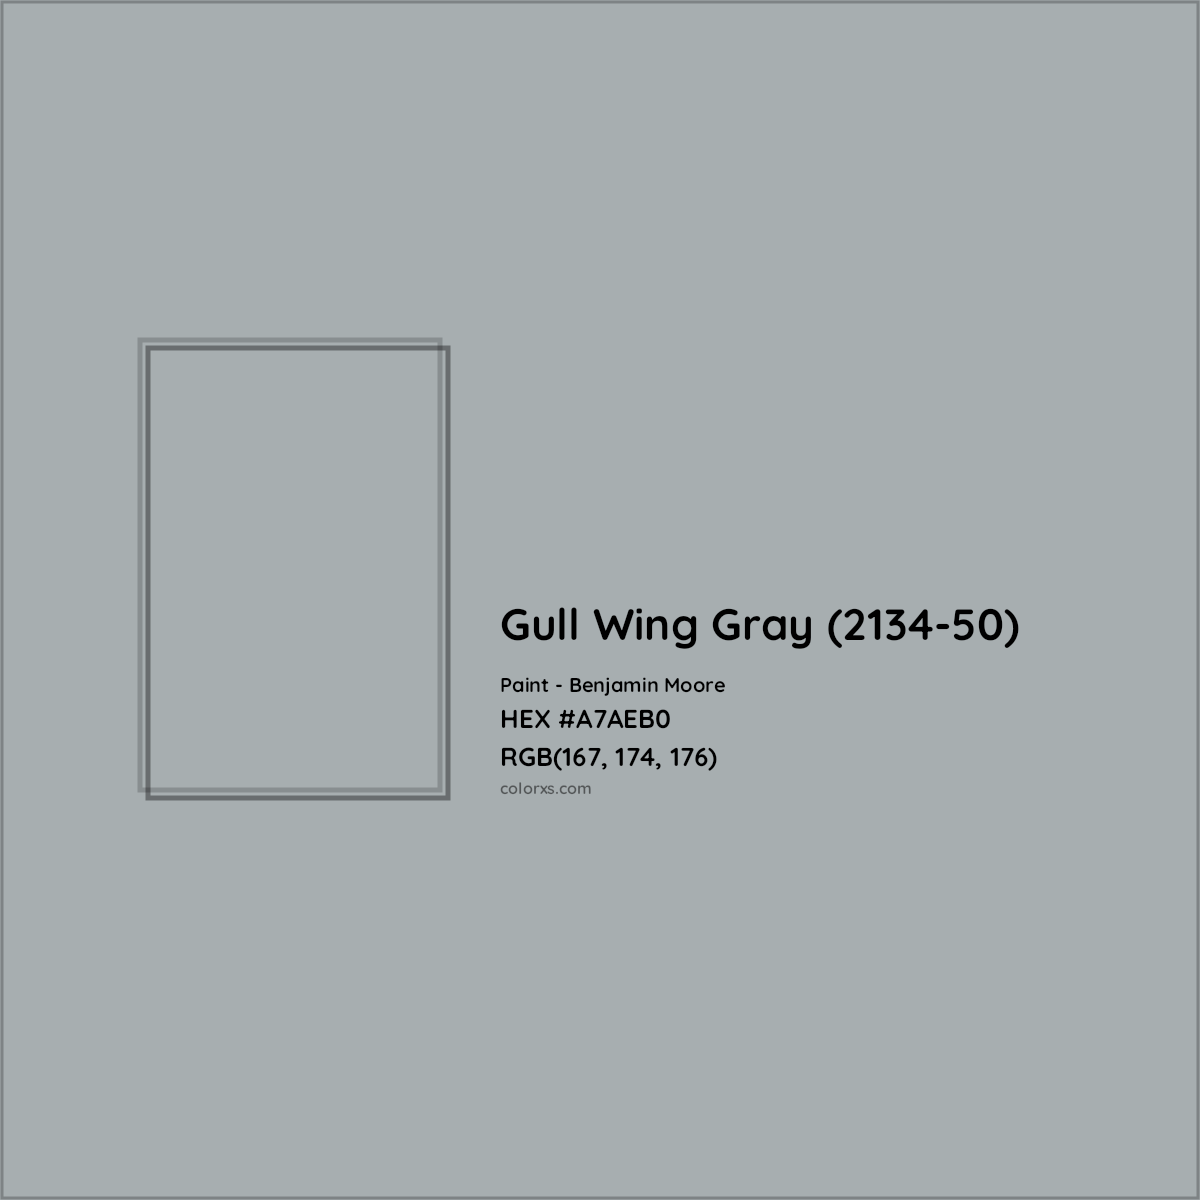 HEX #A7AEB0 Gull Wing Gray (2134-50) Paint Benjamin Moore - Color Code